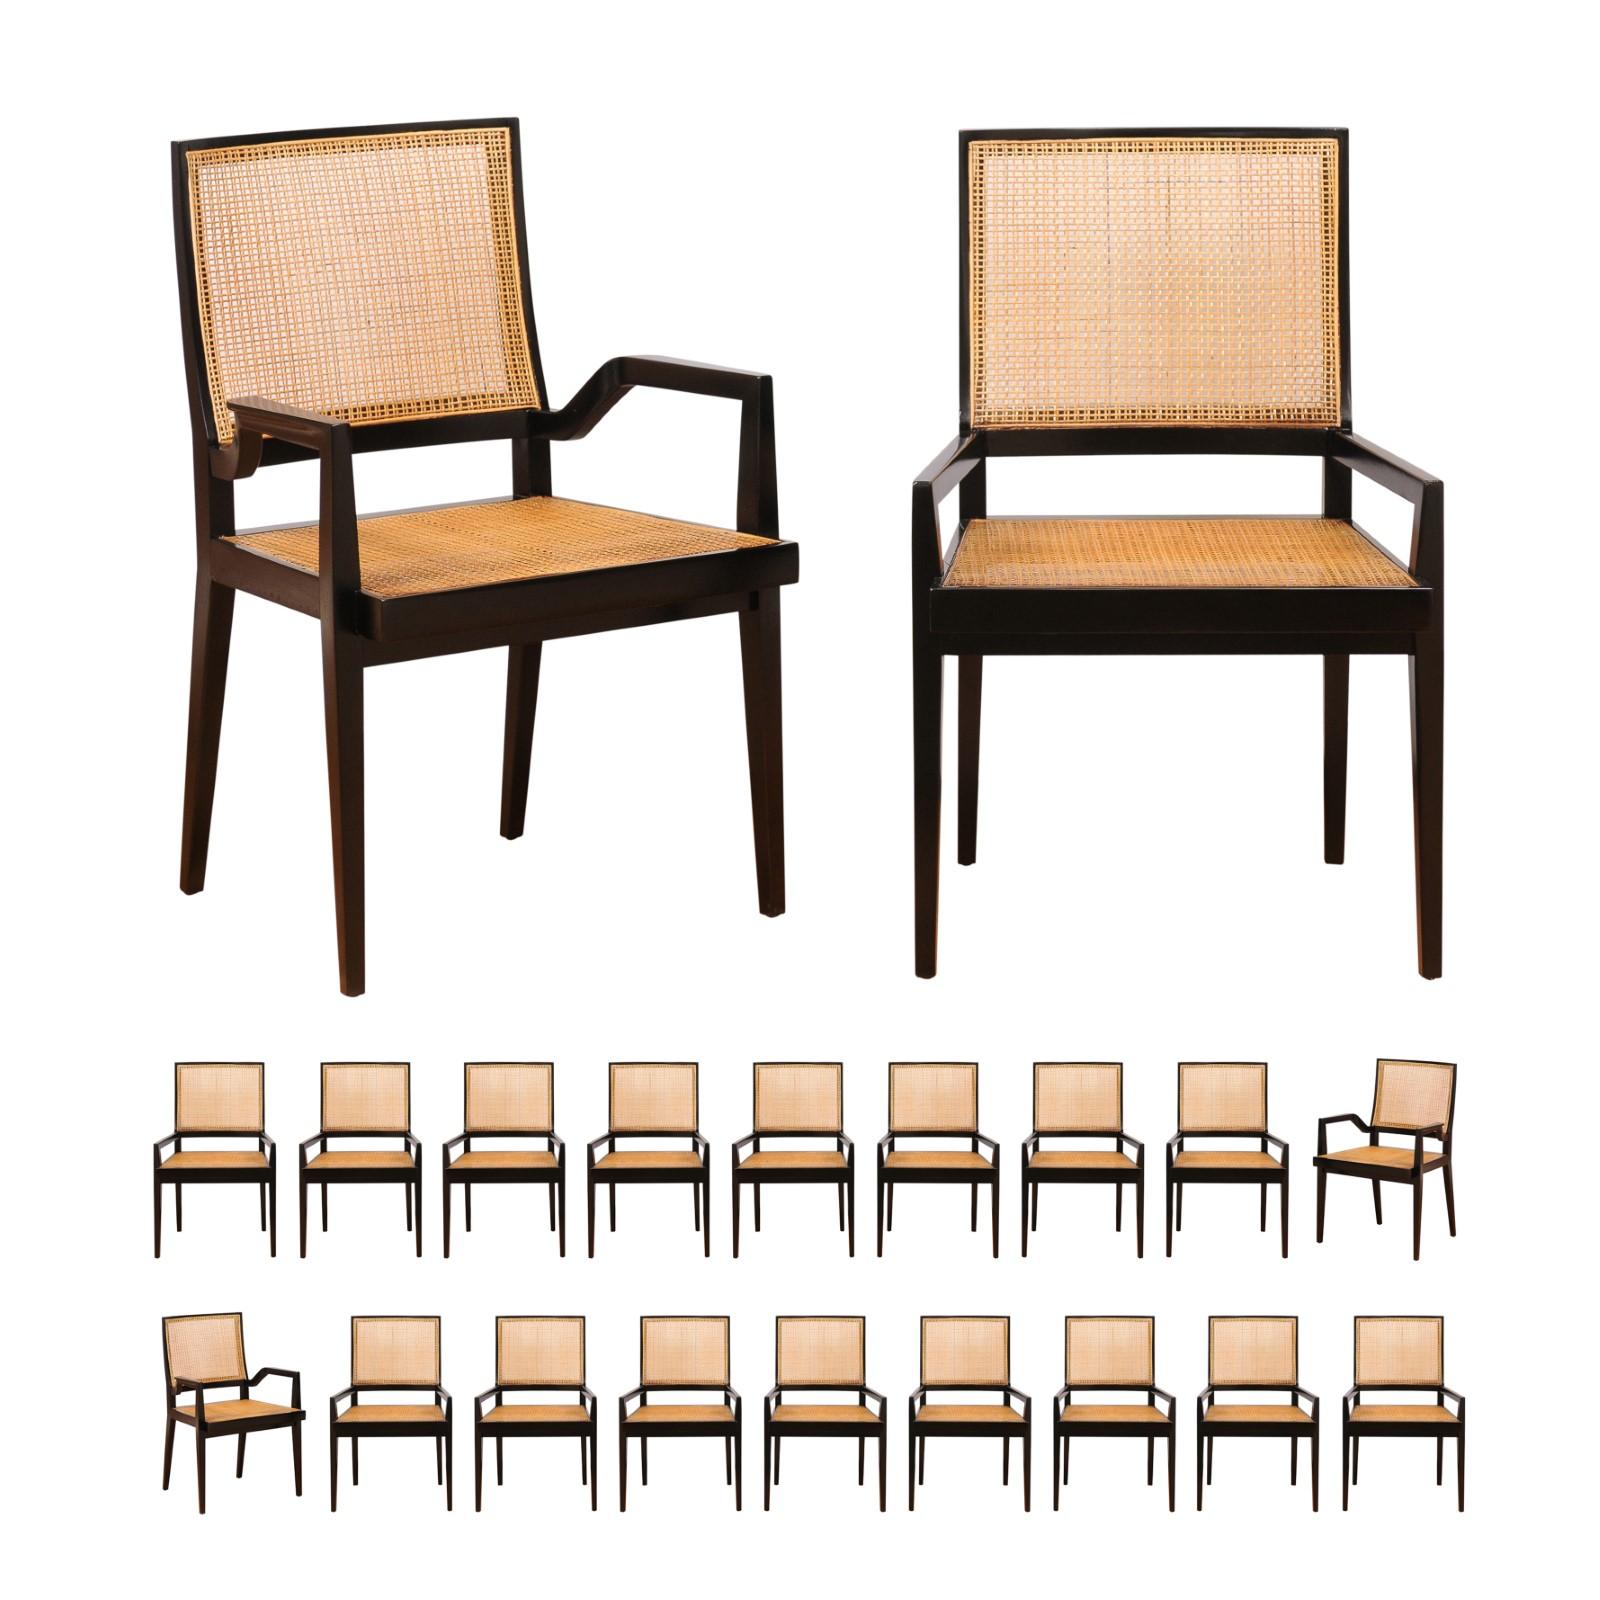 Spectacular Set of 20 Sleek Double Cane Dining Chairs by Michael Taylor For Sale 12